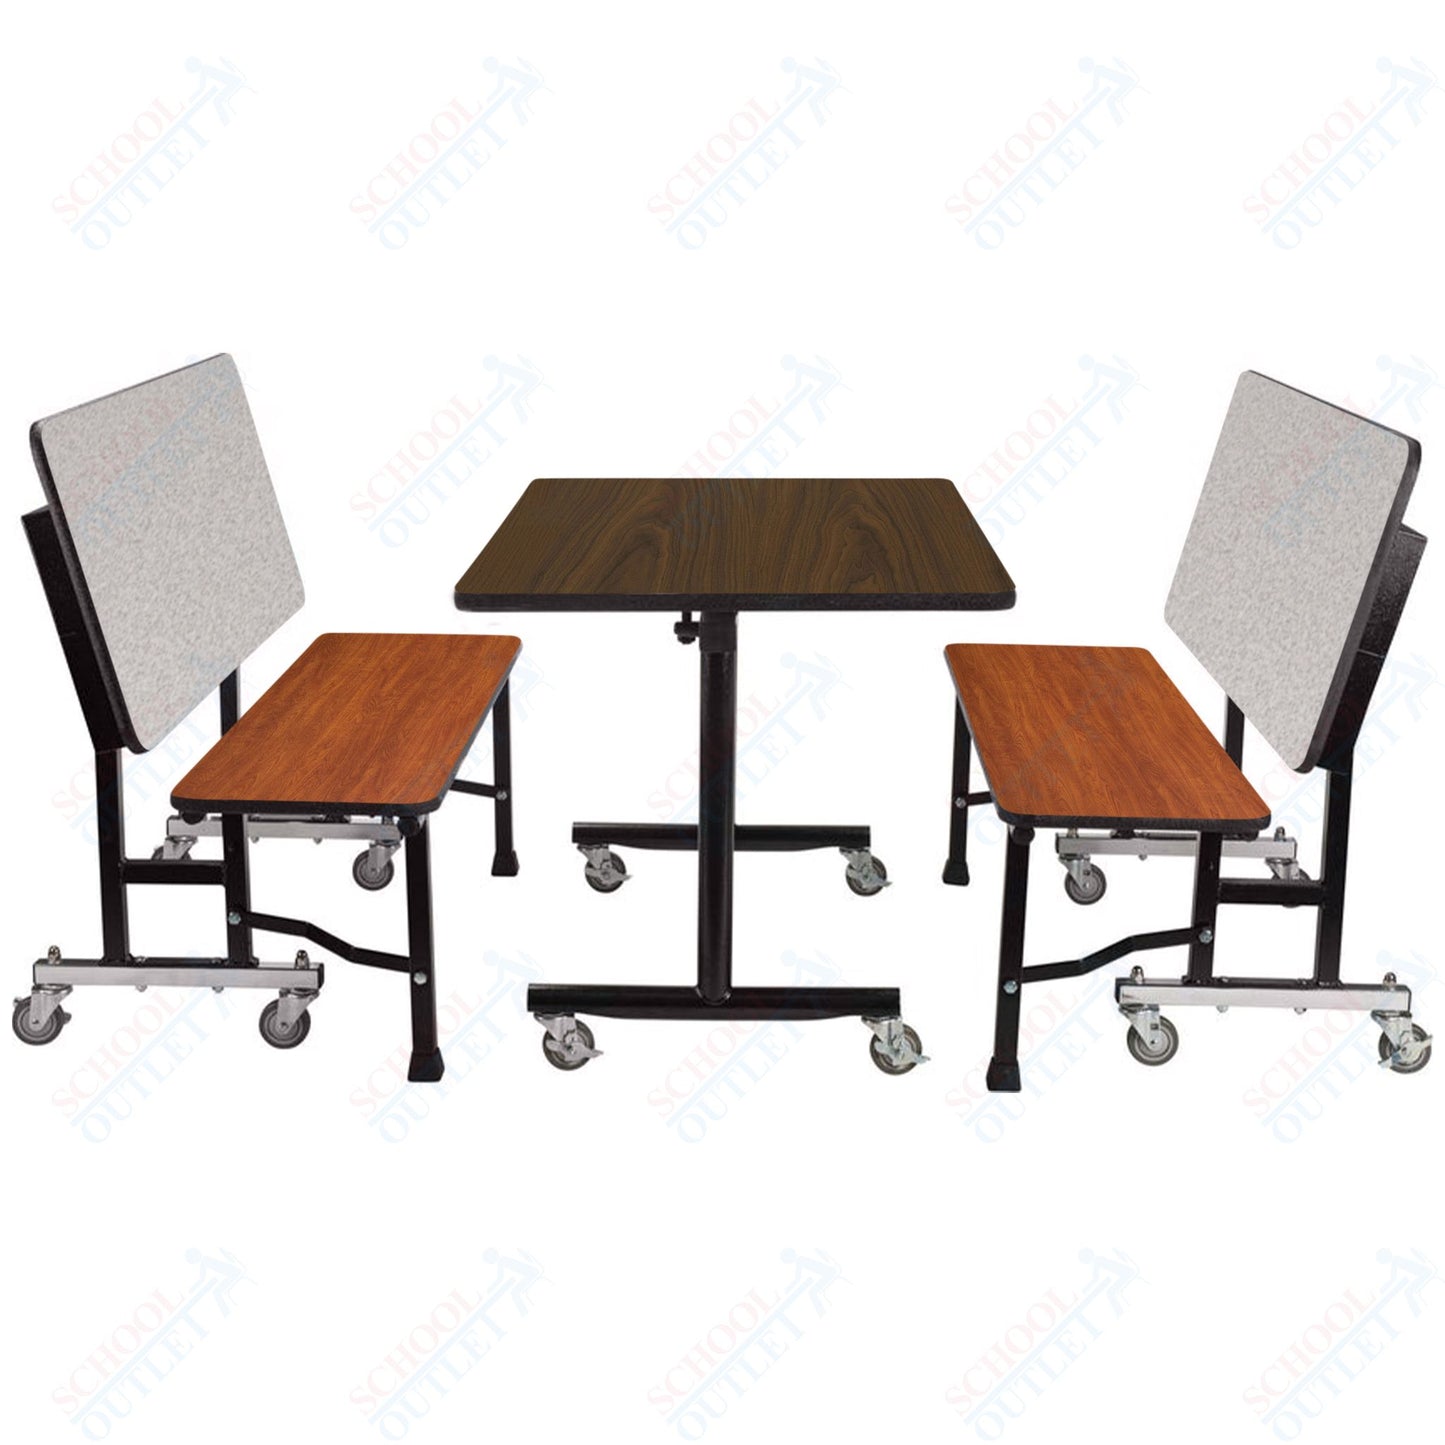 NPS ToGo Booth Set, (1) 30"x60" Table and (2) 60" Benches, Particleboard Core (National Public Seating NPS-TGBTH3060PBTM)